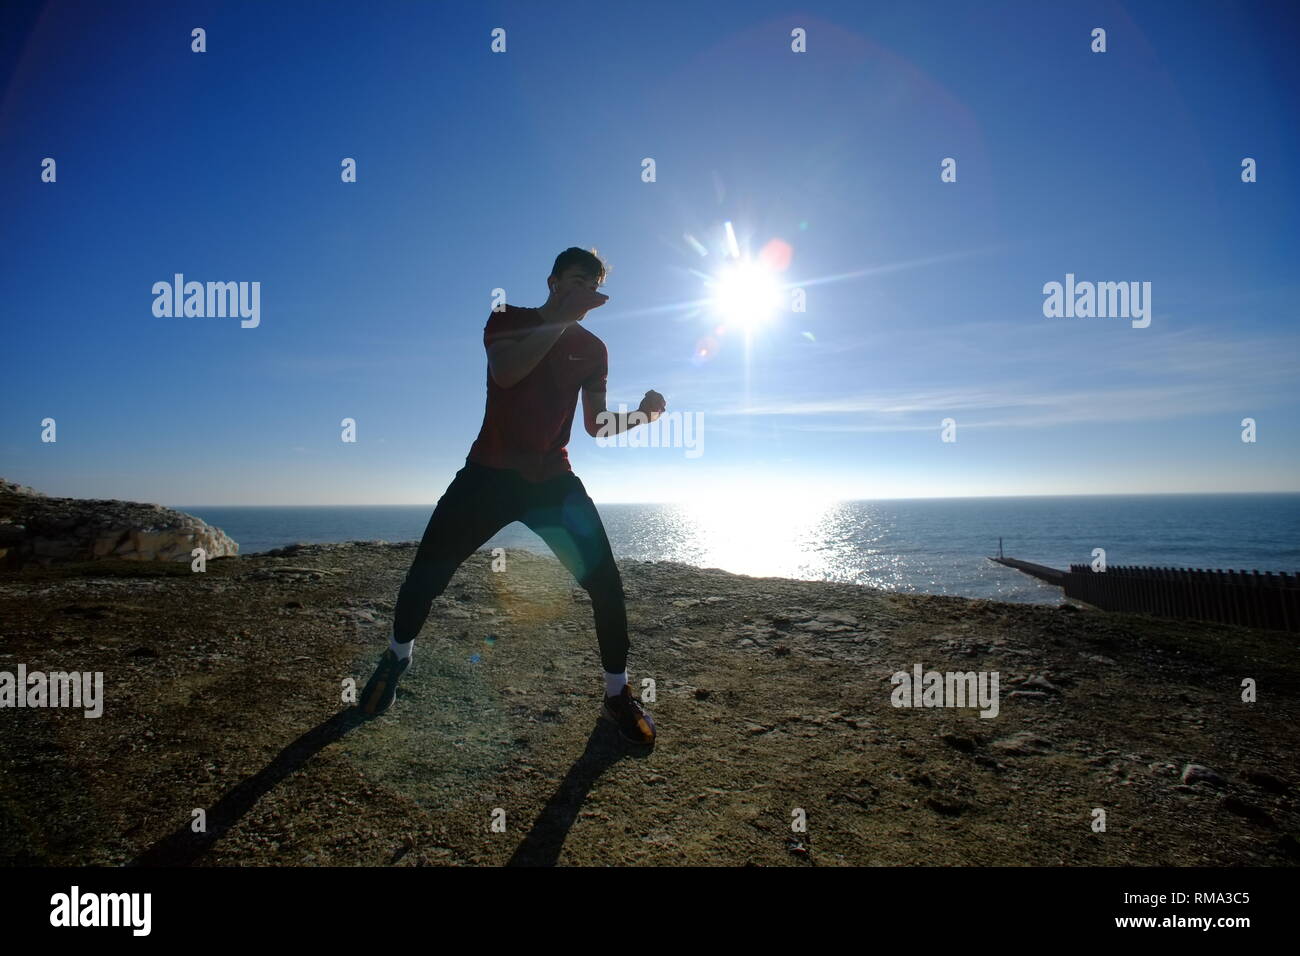 Seaford, East Sussex, UK. 14th Feb, 2019. People enjoying the bright warm sunshine on Seaford Beach, pictured is Sonny Parkinson shadow boxing on the chalk cliffs above Seaford. Credit: Peter Cripps/Alamy Live News Stock Photo